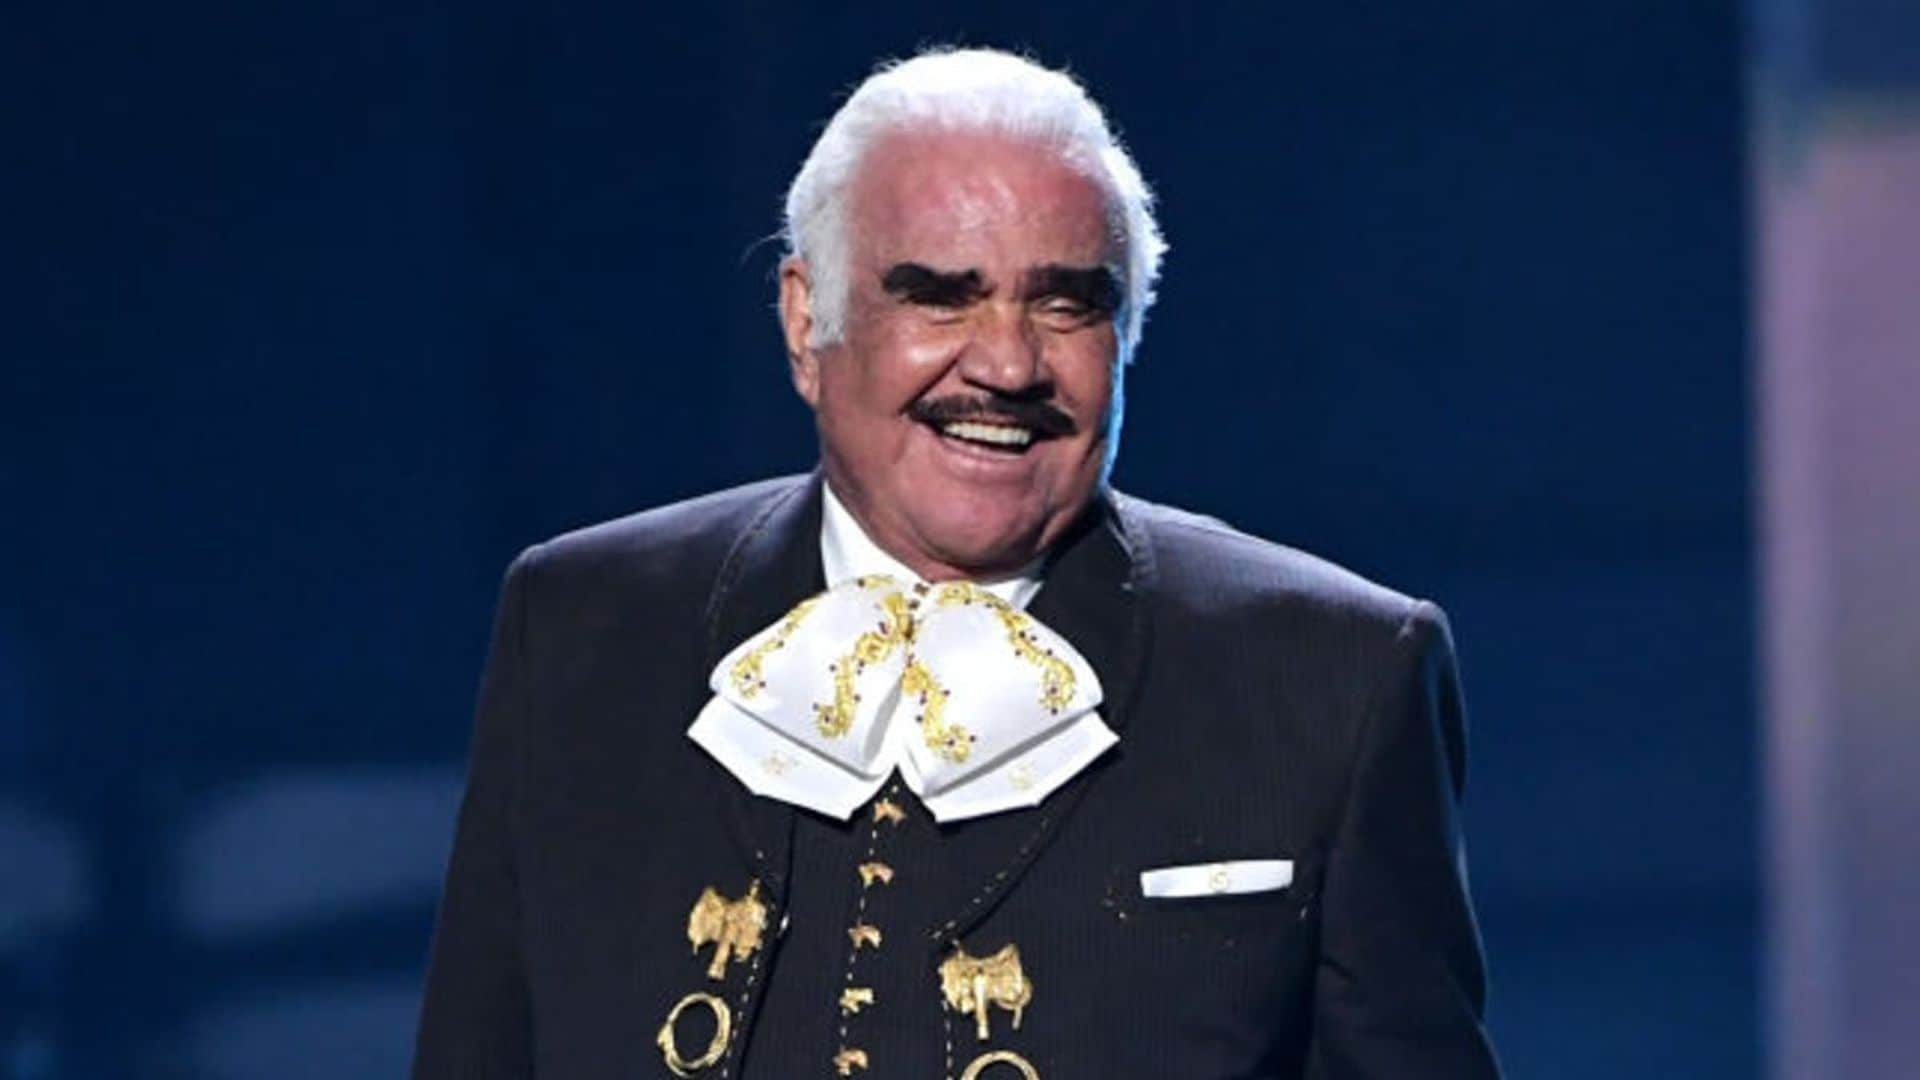 Vicente Fernández is out of the ICU